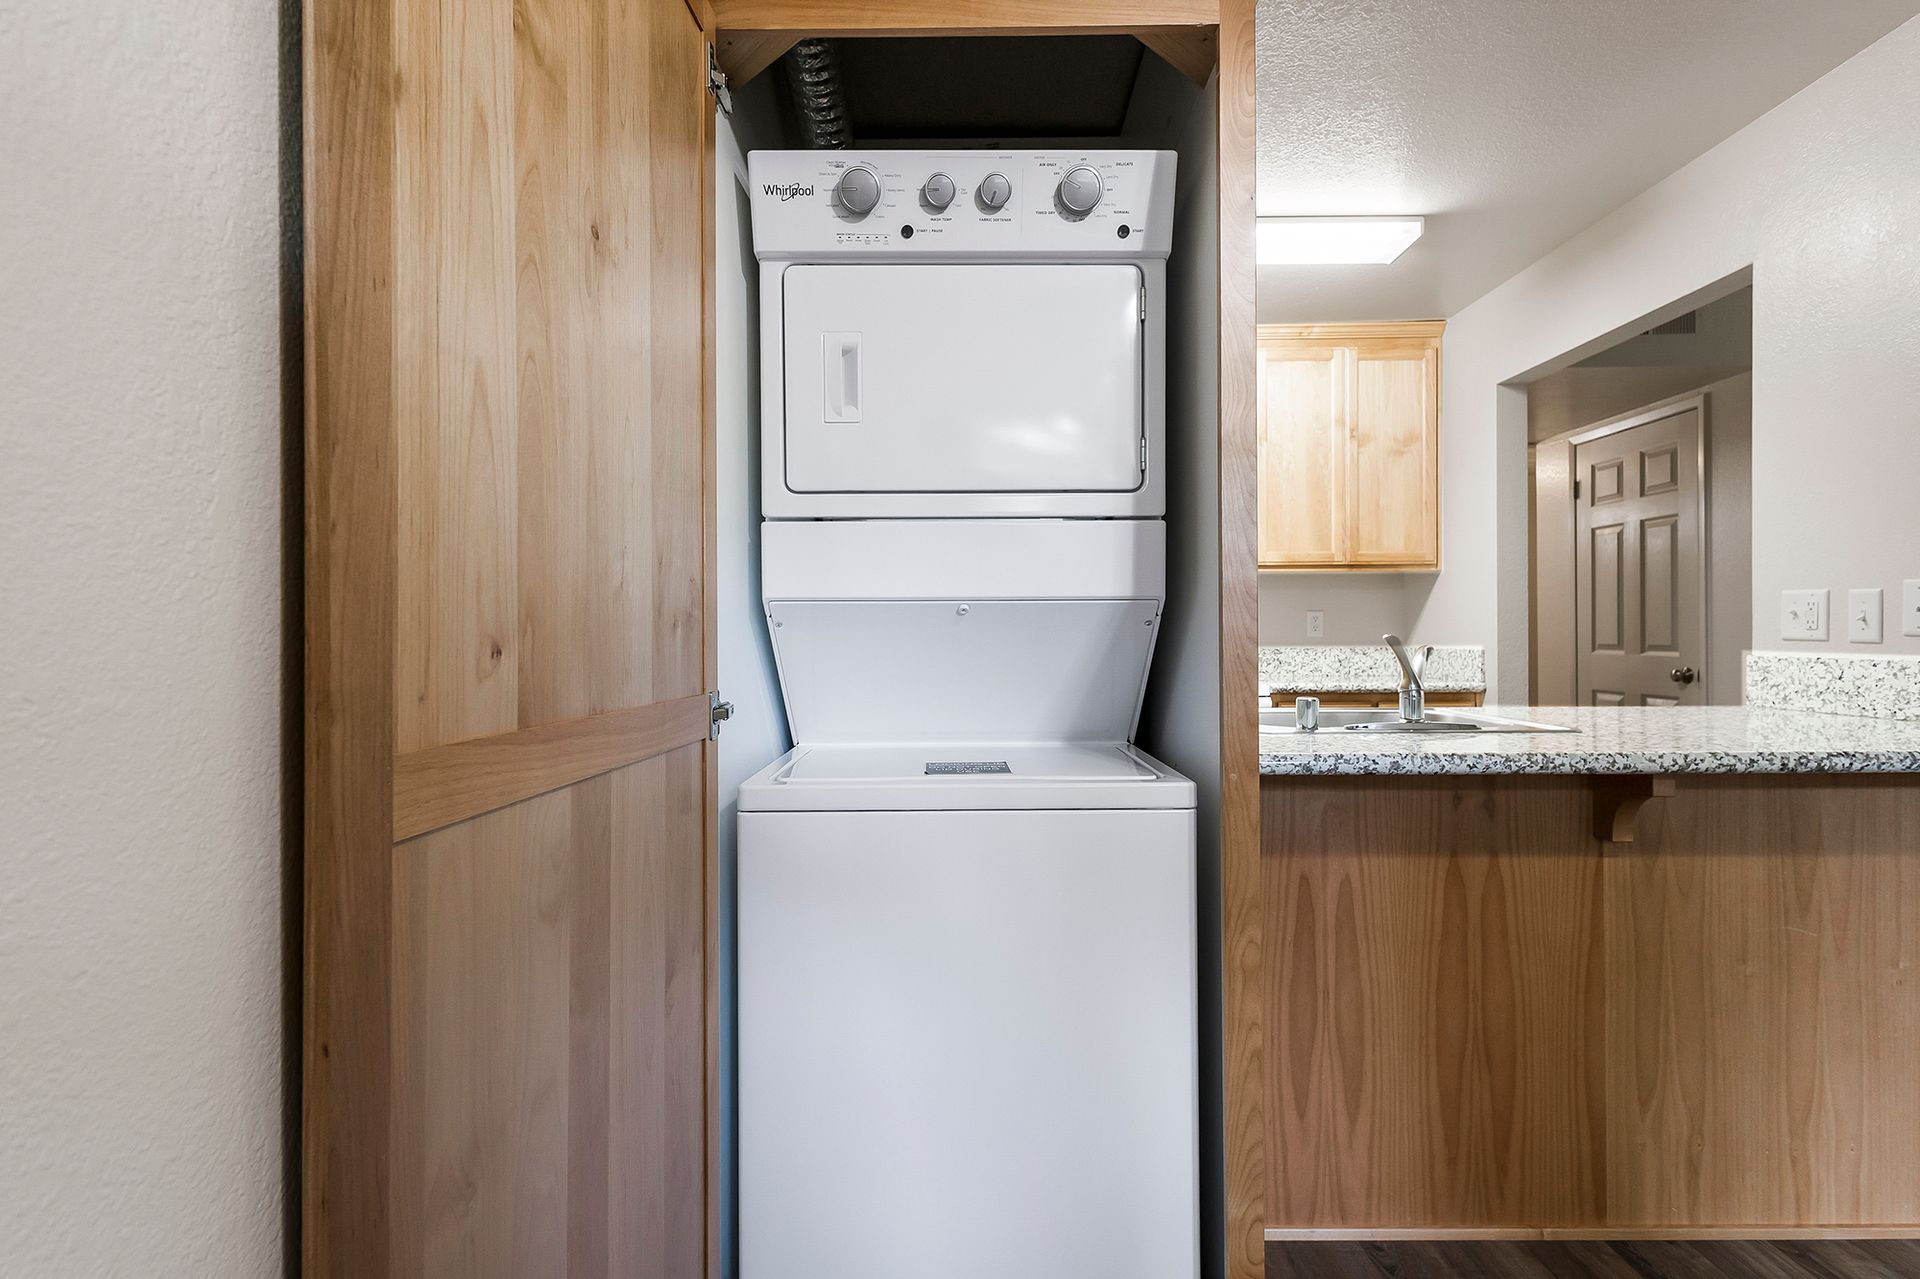 Pine Tree Apartments Washer and Dryer